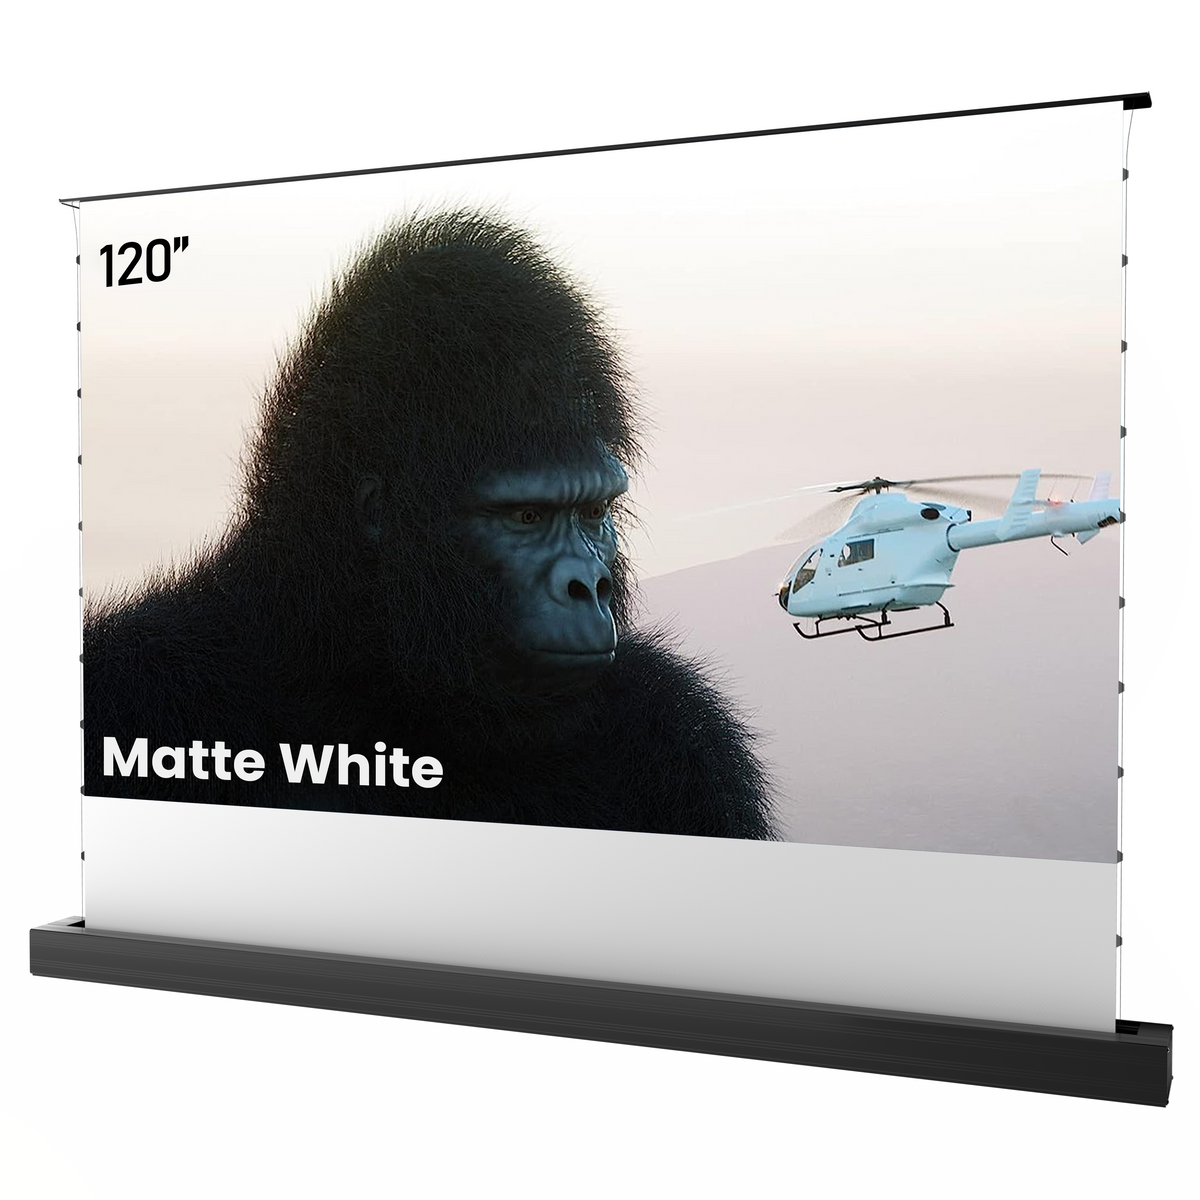 100-inch AWOL Vision Matte White Floor Rising Screen projects sharp details of a gorilla and helicopter with absolute clarity.